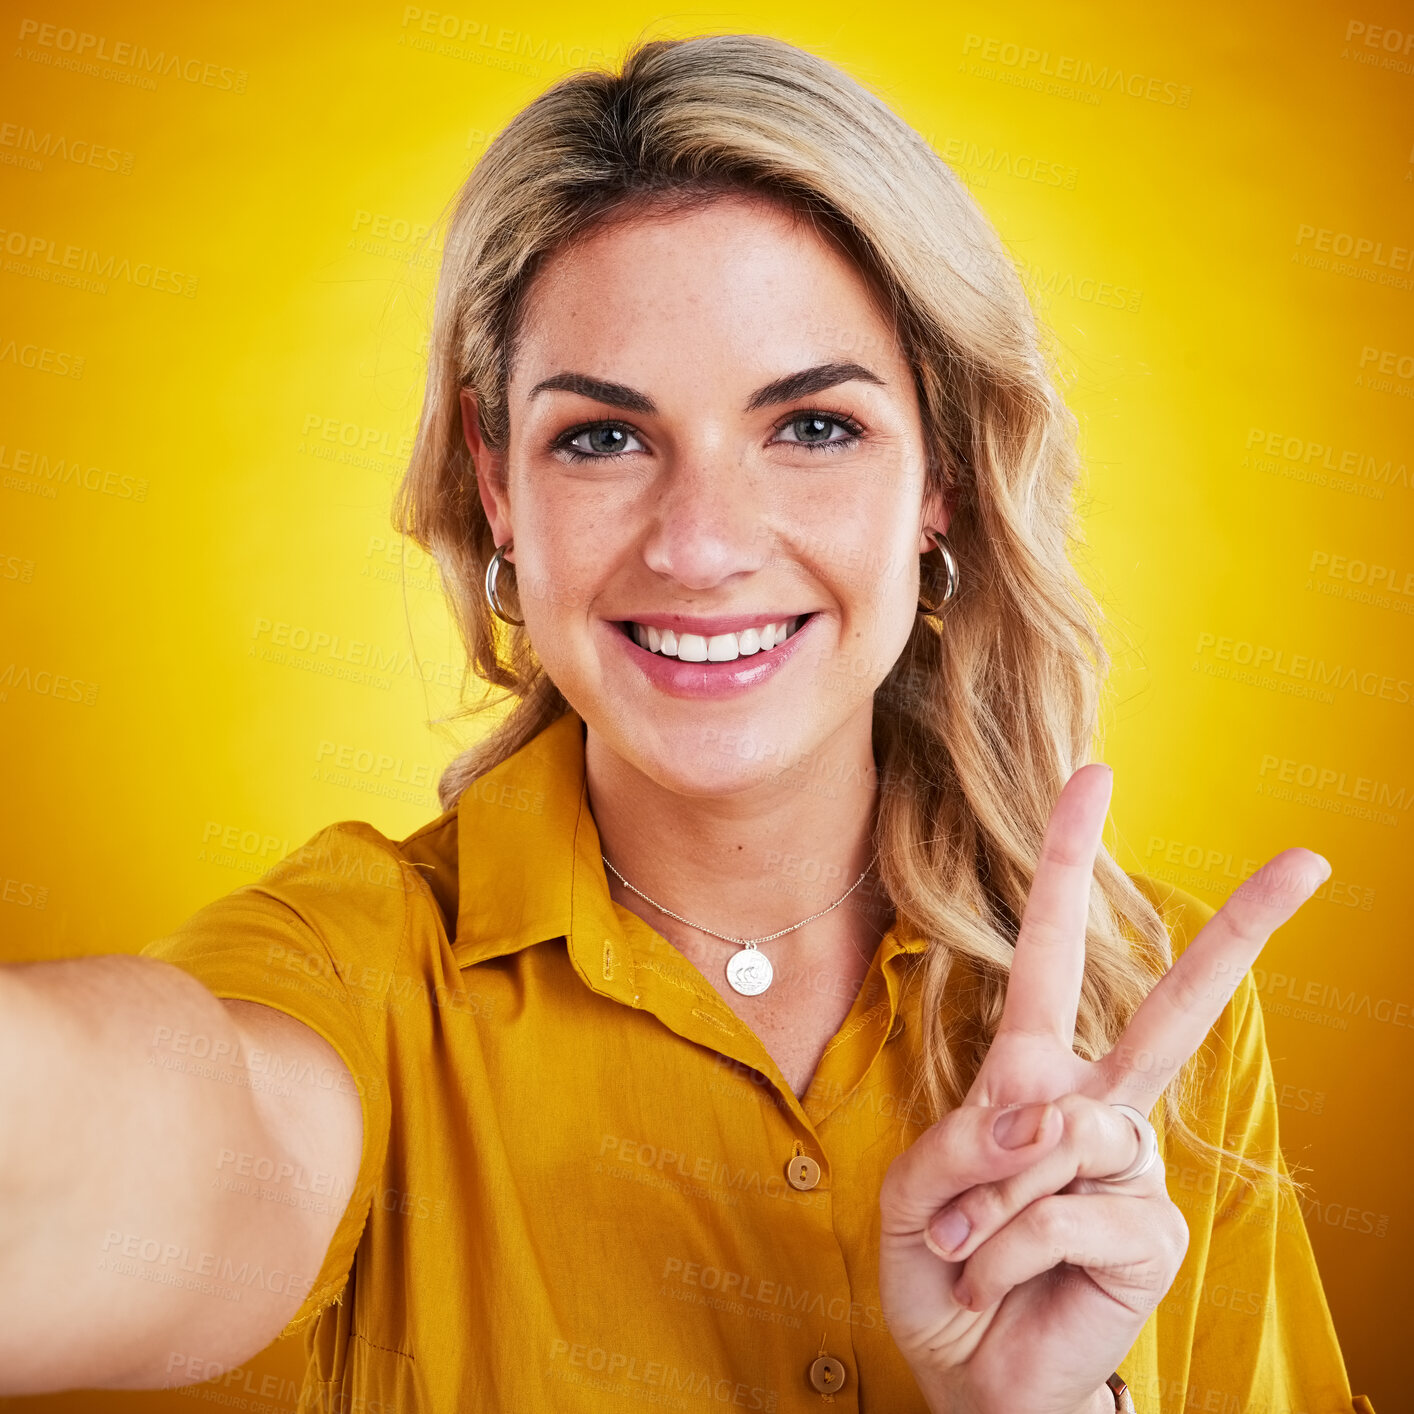 Buy stock photo Selfie, portrait and peace with a woman on a yellow background in studio looking happy. Face, smile and hand gesture with an attractive young female model showing v emoji, symbol or social media pov